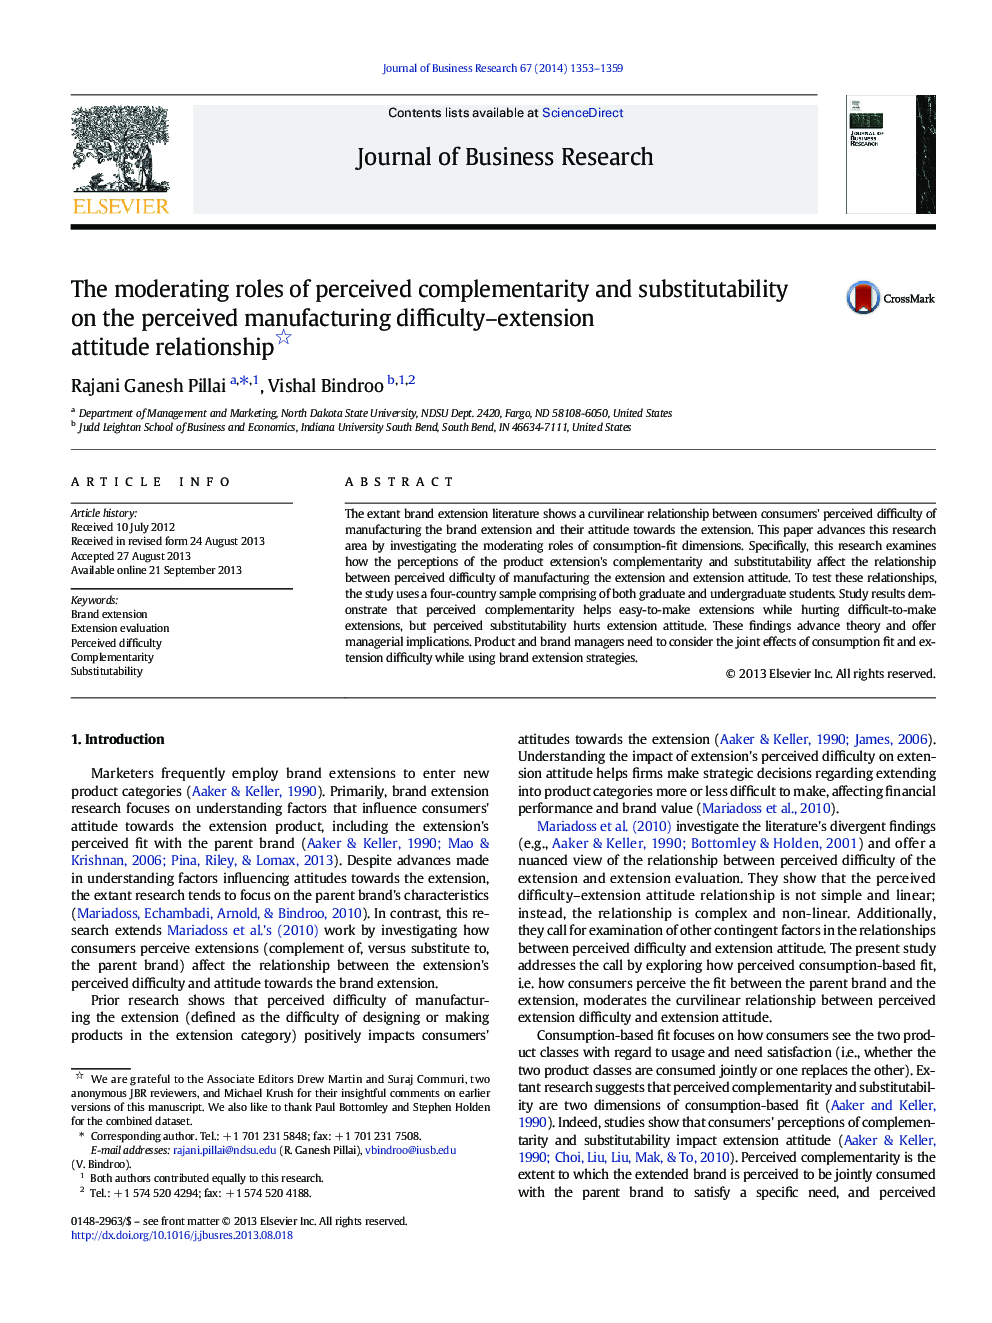 The moderating roles of perceived complementarity and substitutability on the perceived manufacturing difficulty–extension attitude relationship 